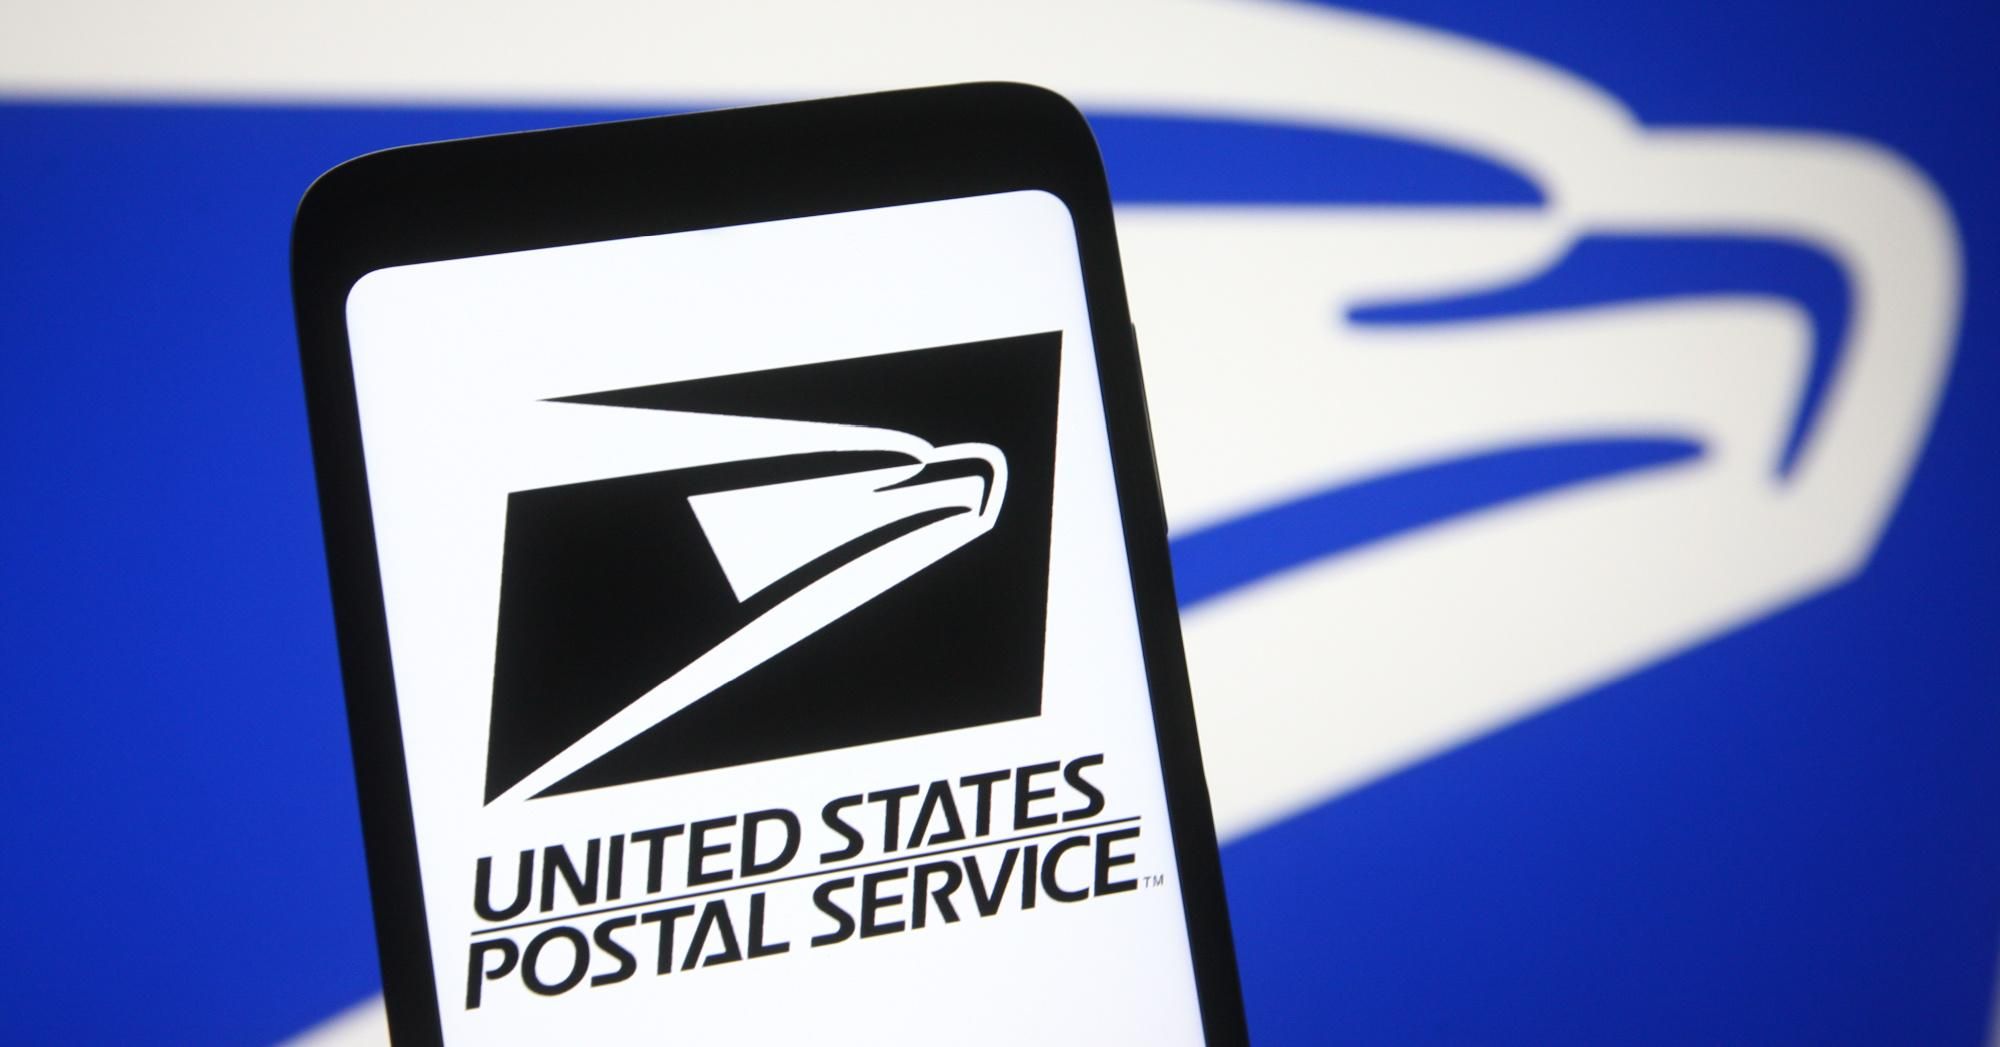 In this photo illustration, the United States Postal Service (USPS) logo is seen on a smartphone and a PC screen.